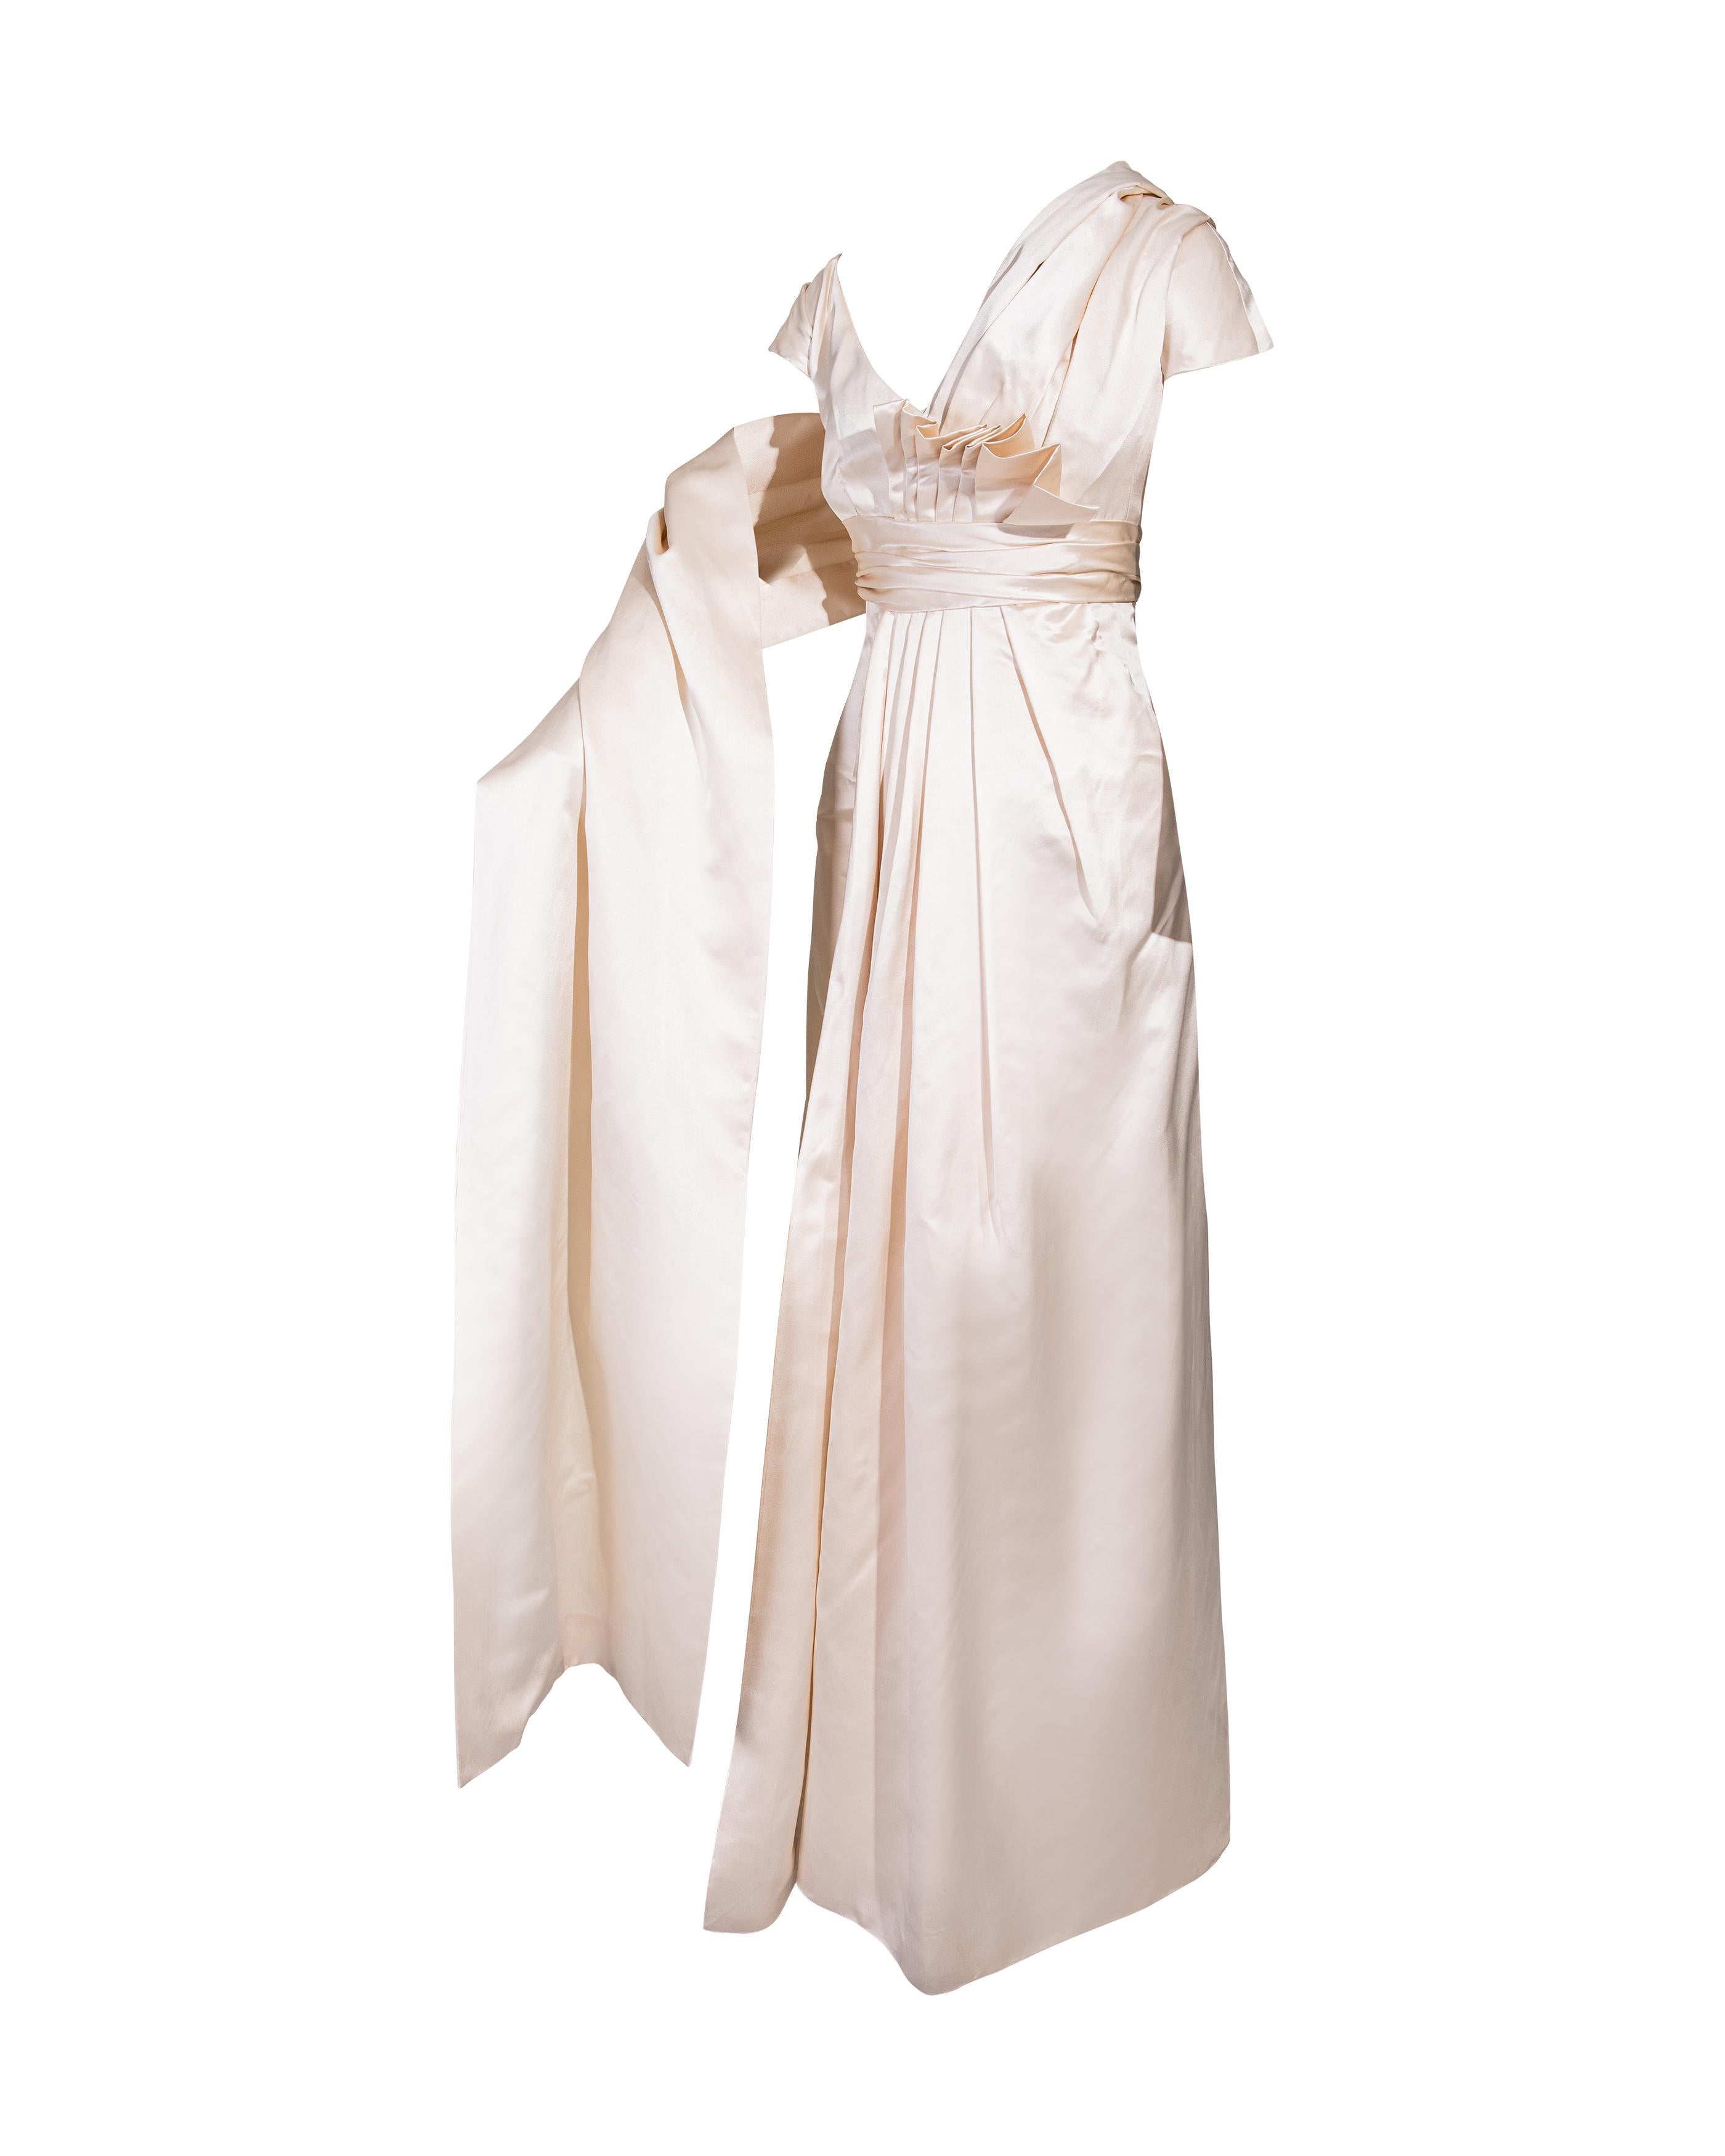 S/S 1955 Christian Dior (Attributed) Short Sleeve Ecru Satin Gown with Sash In Good Condition In North Hollywood, CA